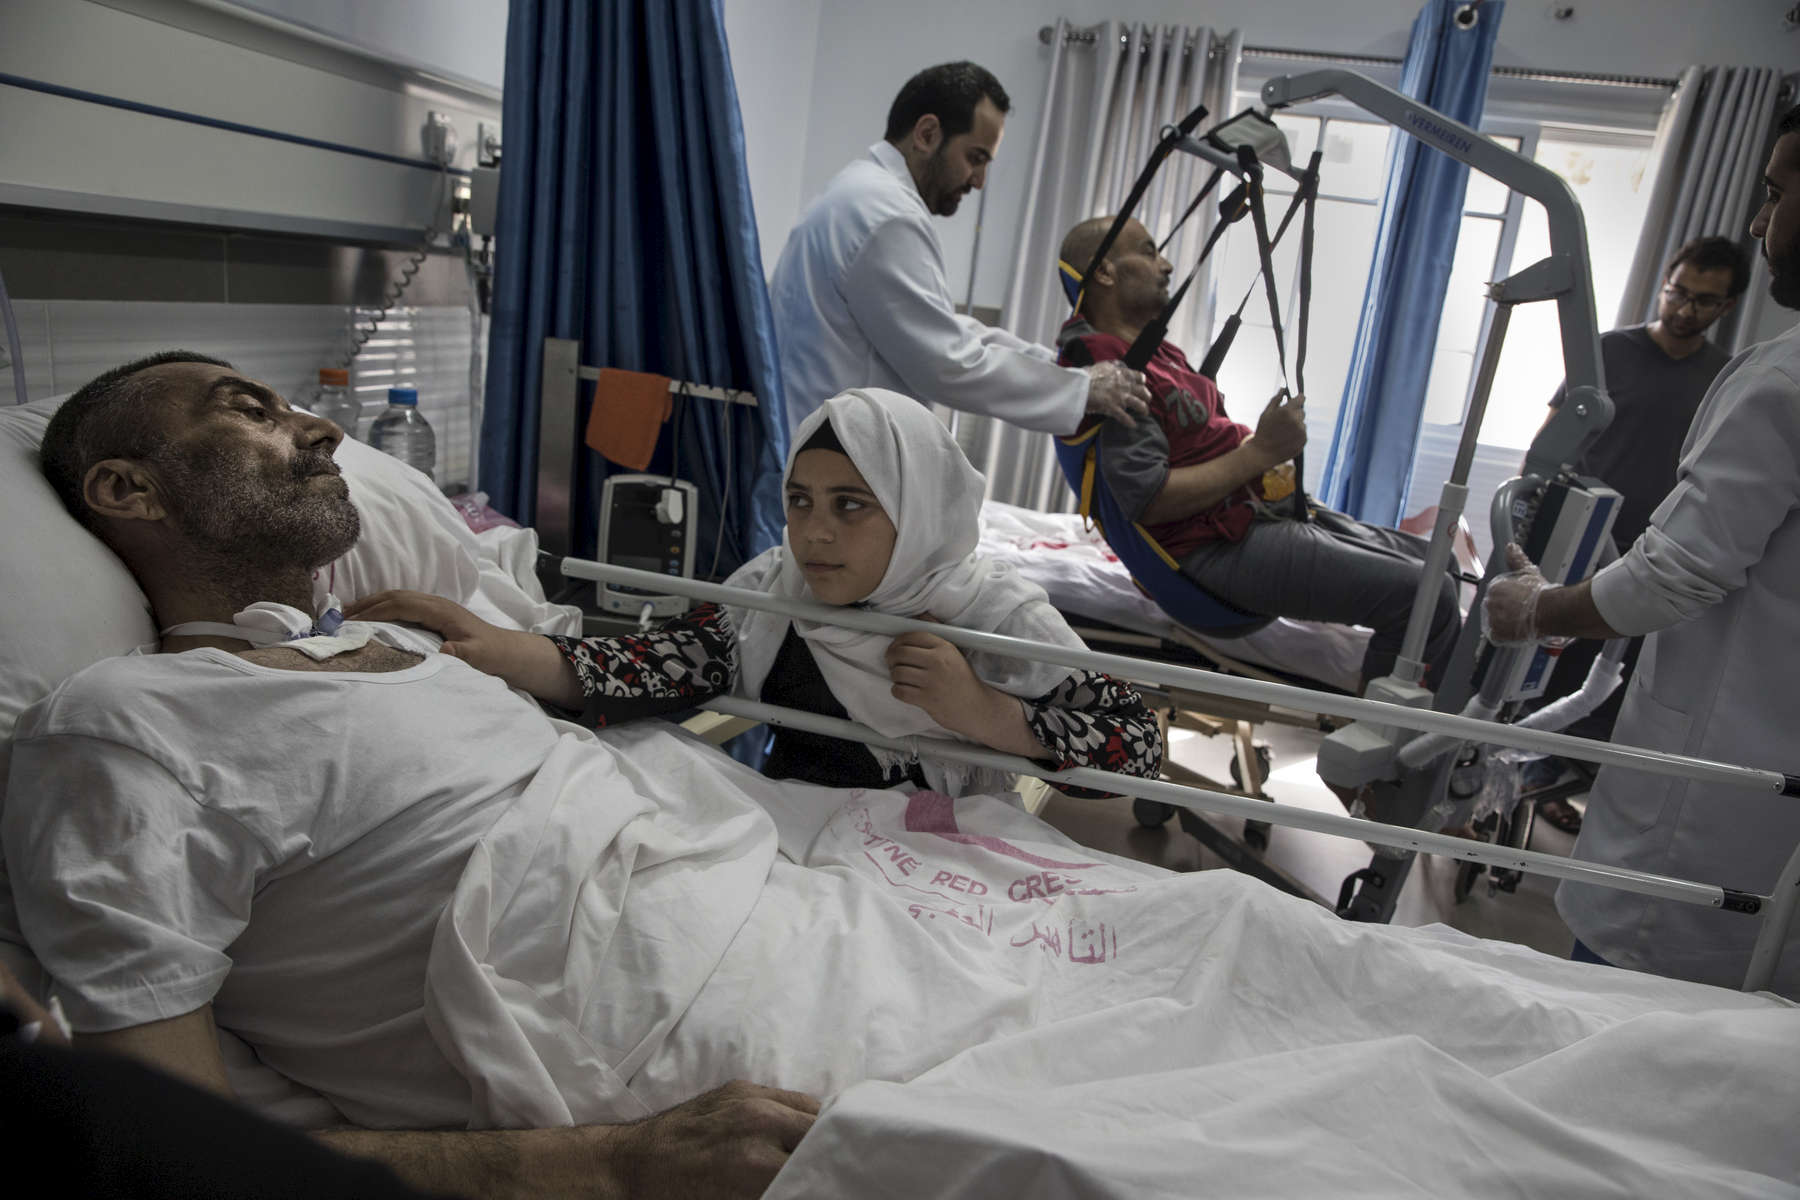  GAZA STRIP- MAY 19,2018 : Rashad Al-Baba, 58, shot twice by Israeli forces is seen with his grand daughter Lujain Al-Baba, 12, at the Red Crescent Rehabilitation Center of Al-Amal on May 19,2018 in Gaza strip. He was injured on March 30th when he arrived to the protest near Rafah looking to protect his grand children who went there without his knowledge. After the injury, Rashad suffered a heart attack, spending 27 days in the intensive care unit. The problems and complications affecting Gaza today are overwhelming. The world, seemingly accustomed to the suffering of the Gazan people turns a blind eye. (Photo by Paula Bronstein ) 